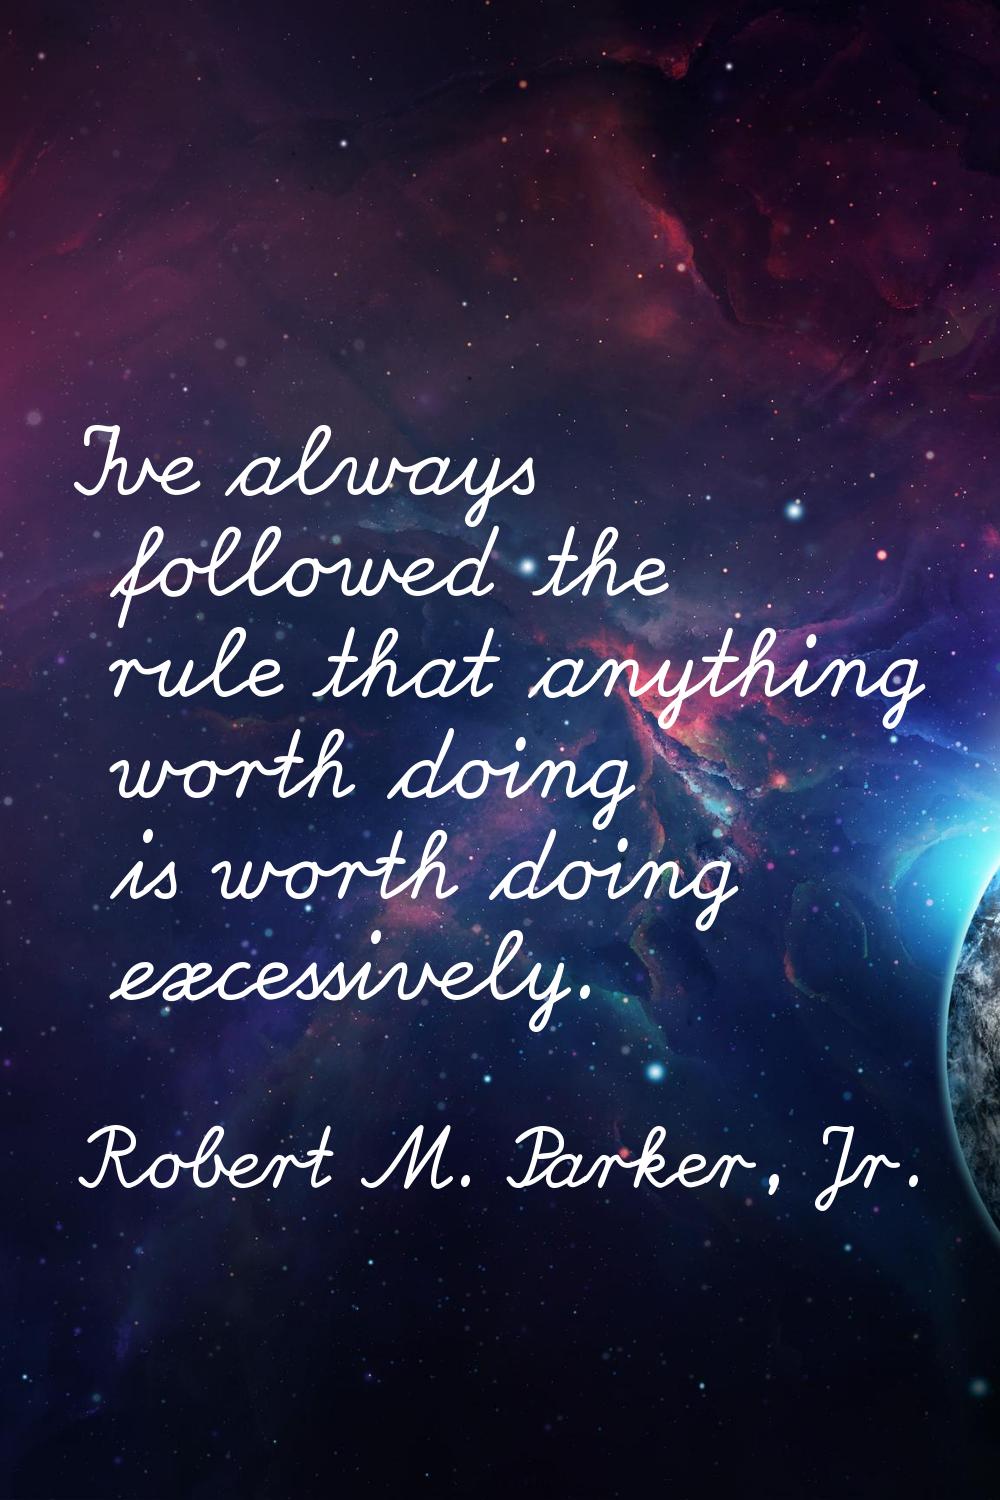 I've always followed the rule that anything worth doing is worth doing excessively.